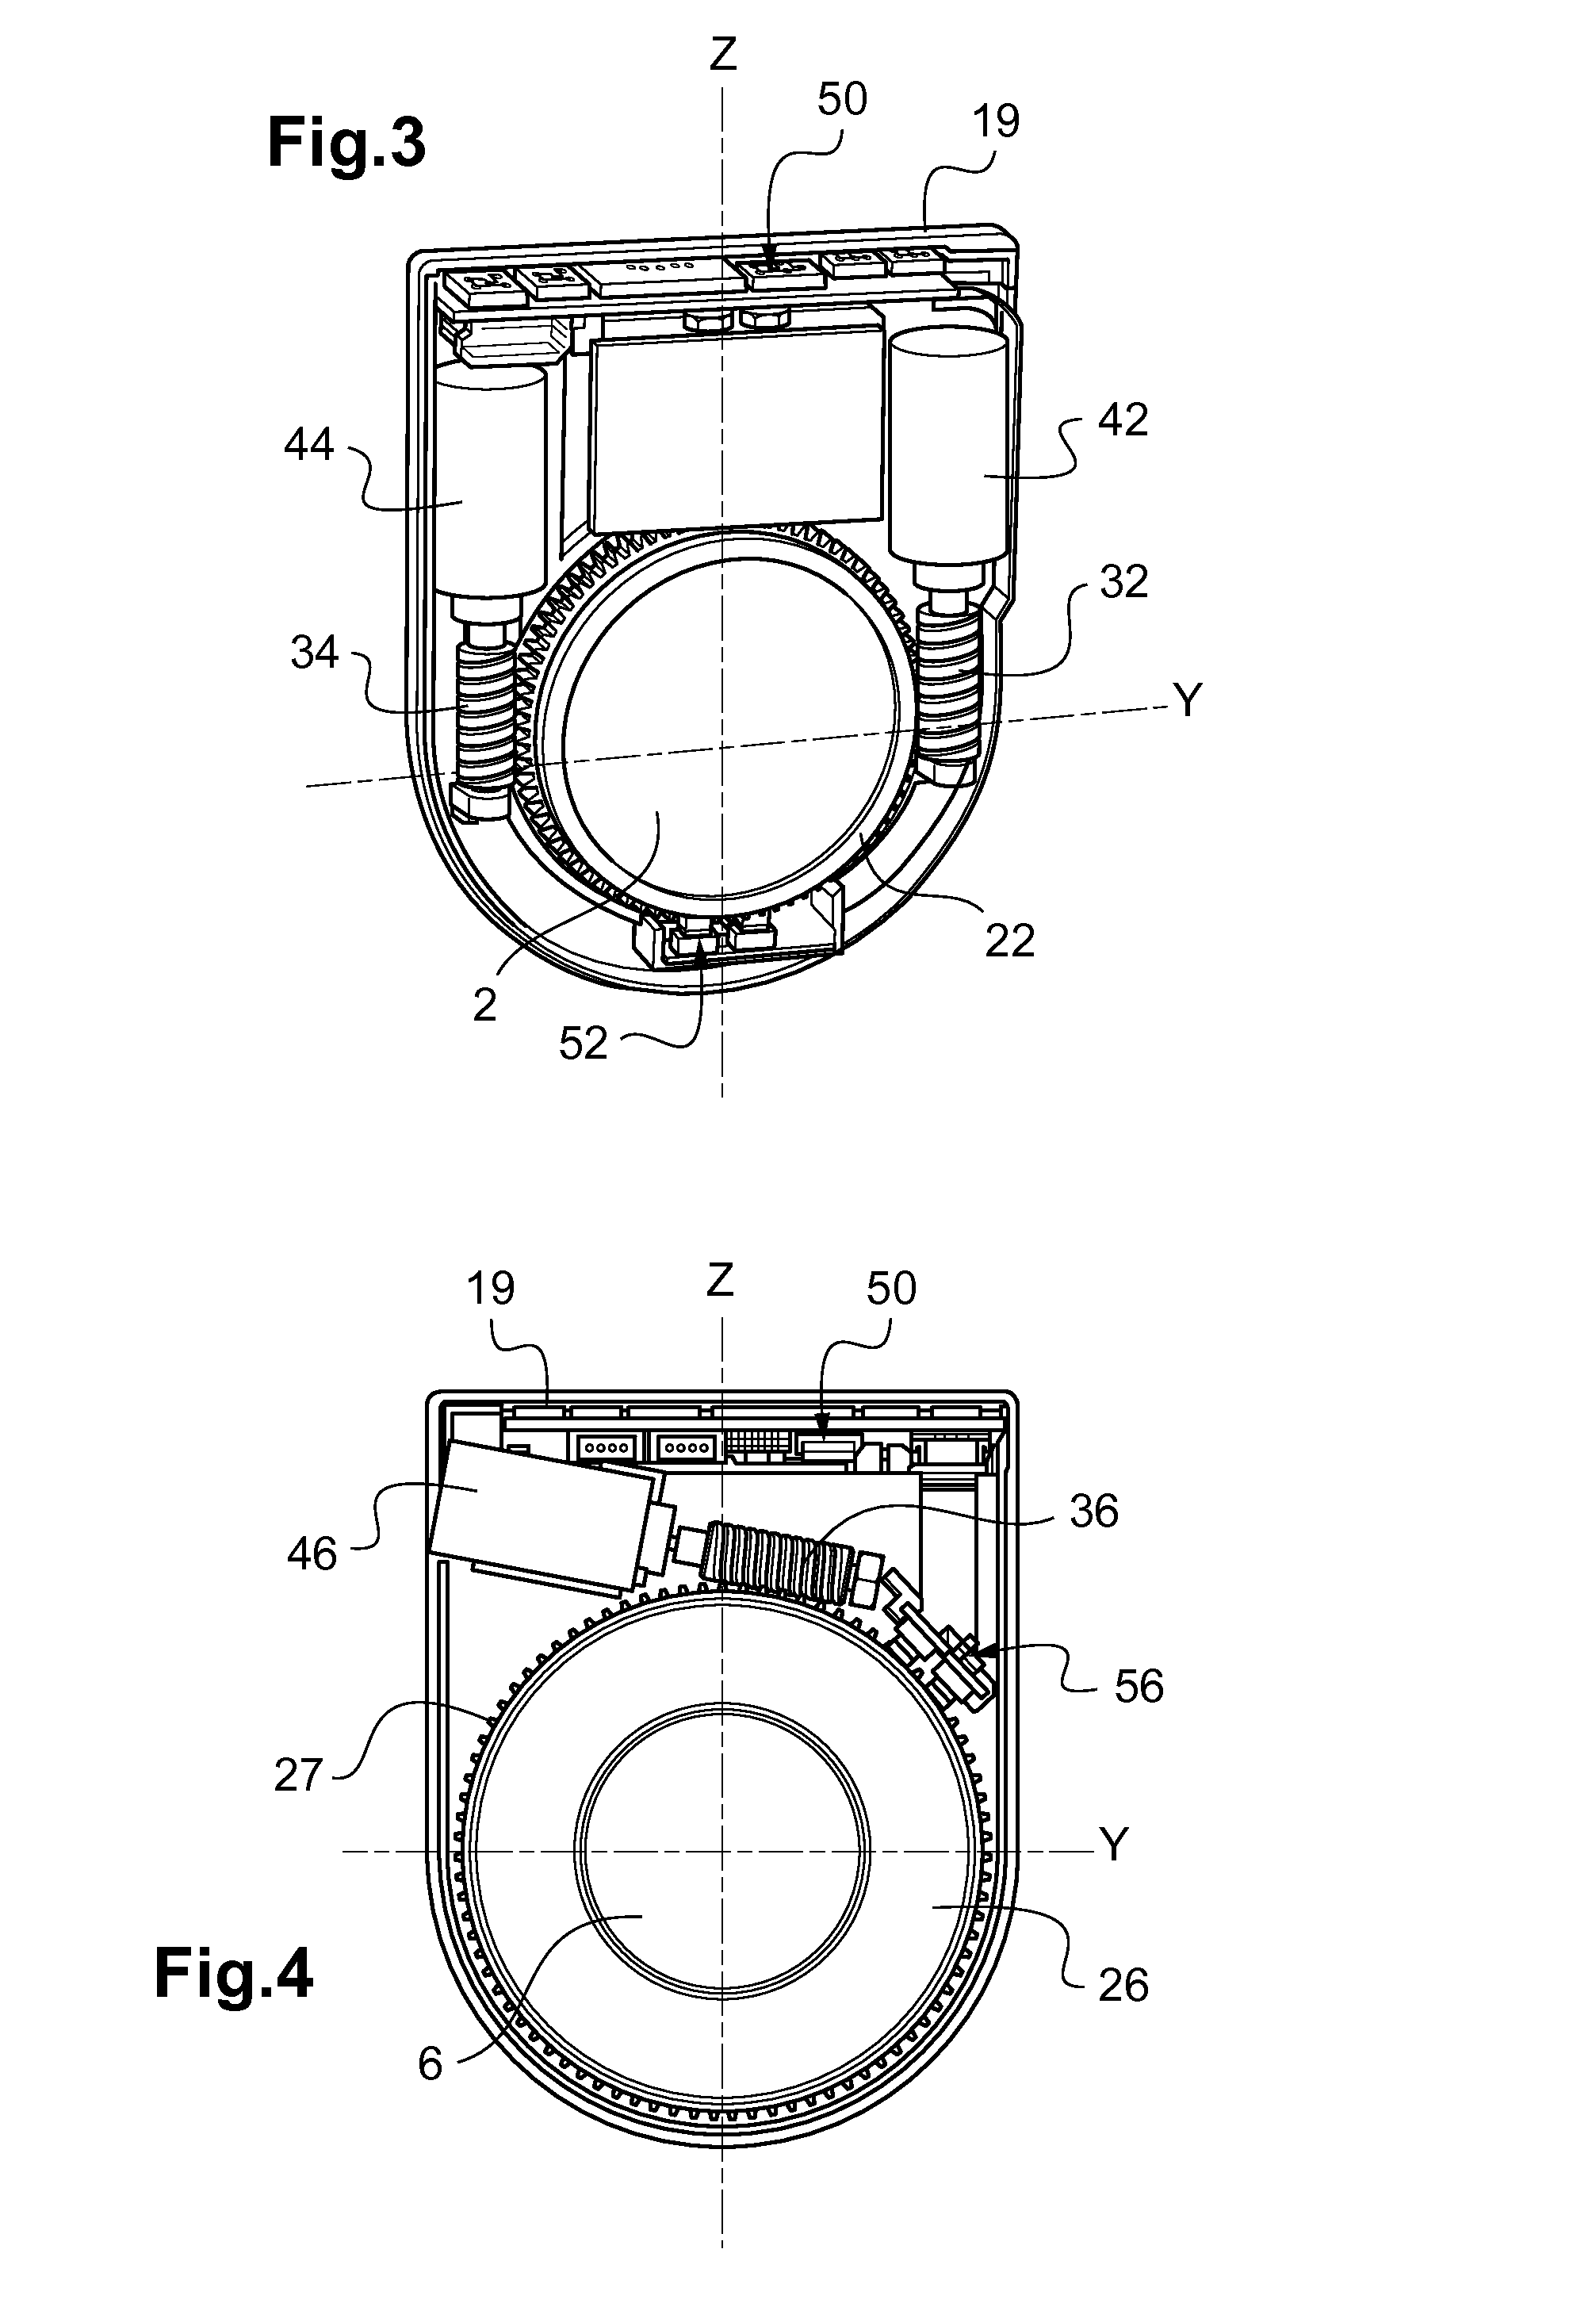 Phoropter, and method for measuring refraction using a phoroptor of said type